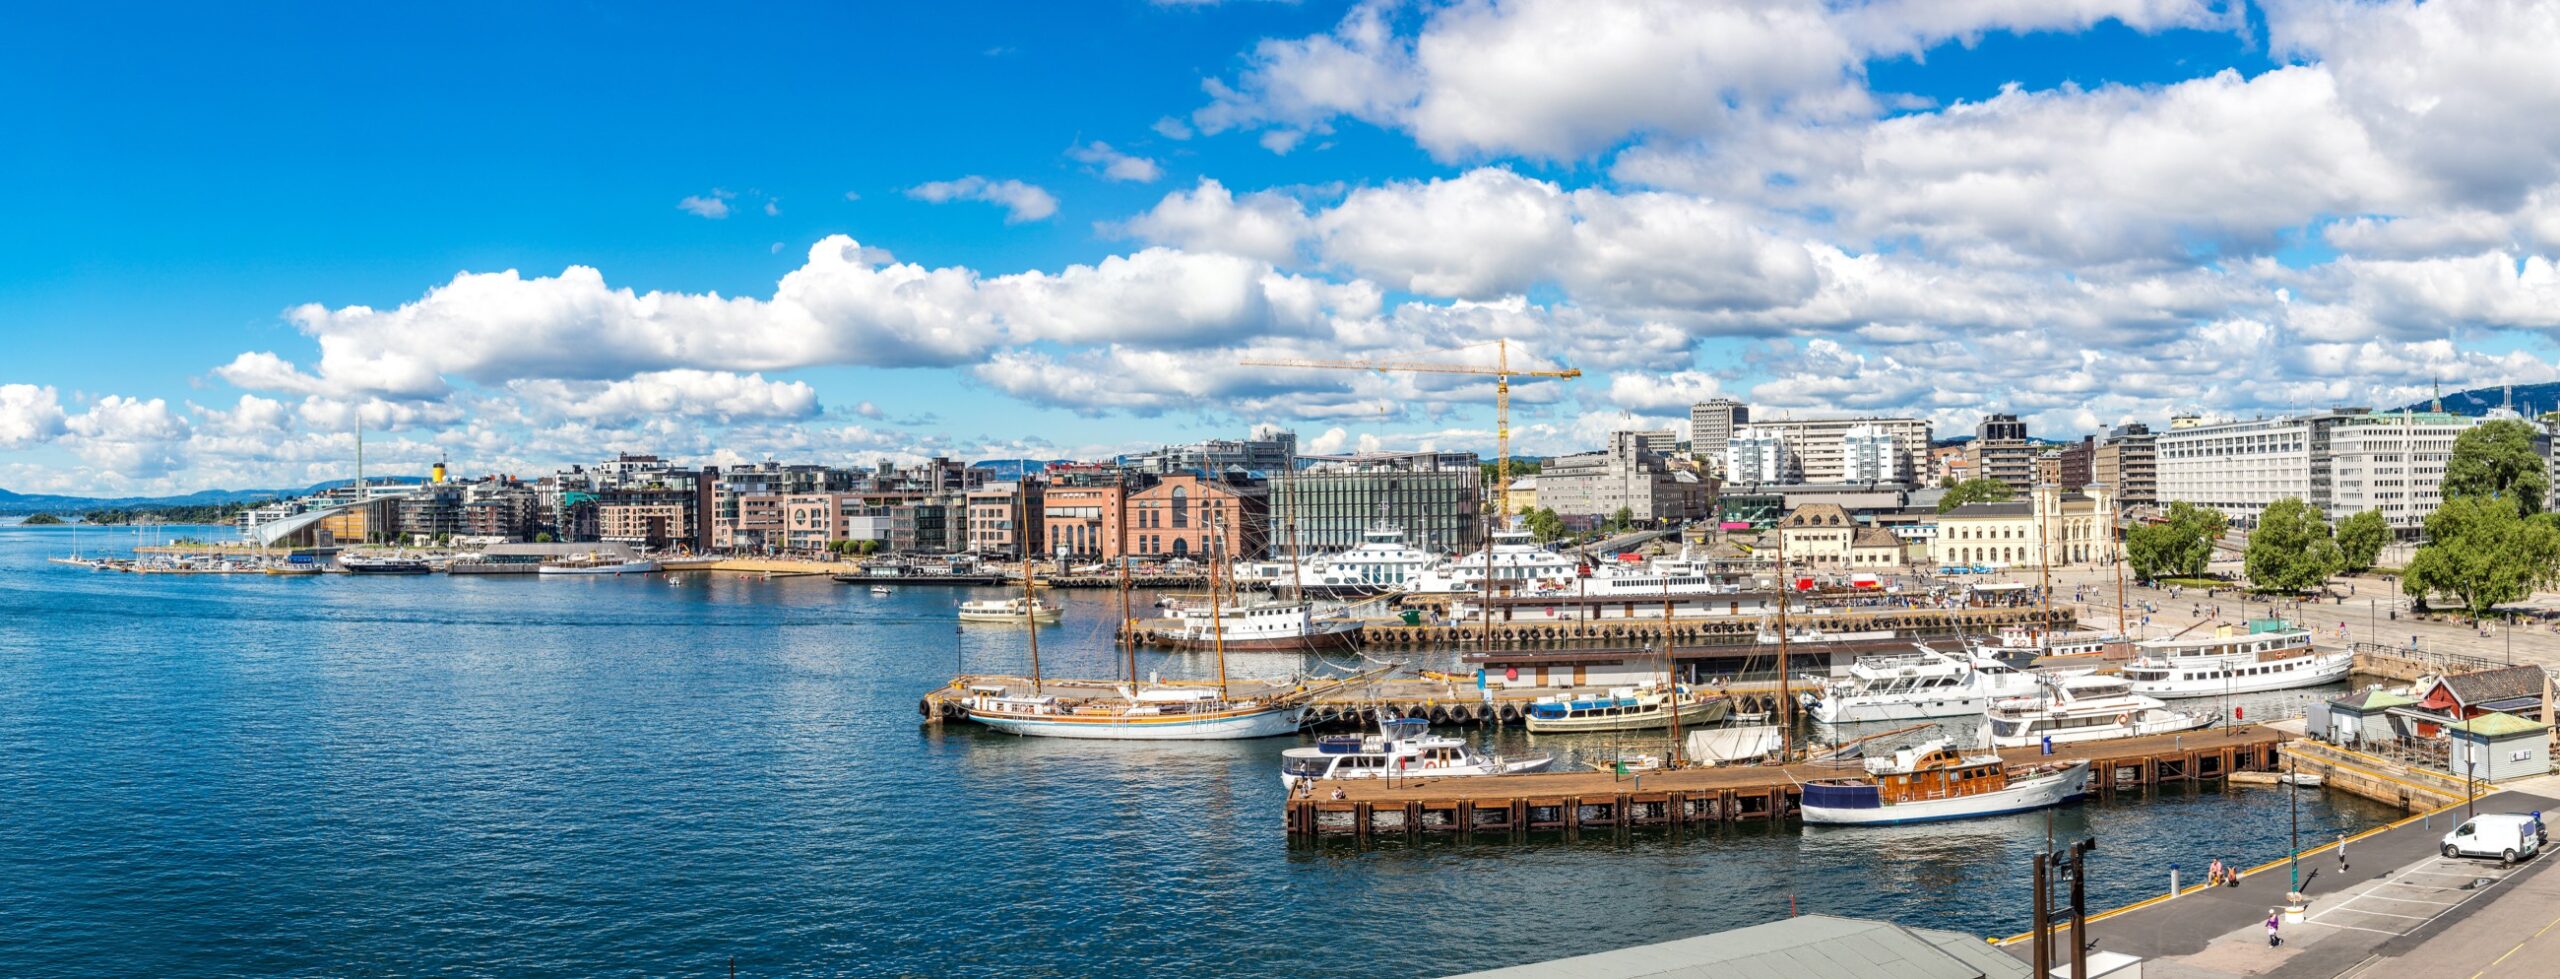 Oslo–A-City-that-knows-how-to-Party-Best-Things-to-Do